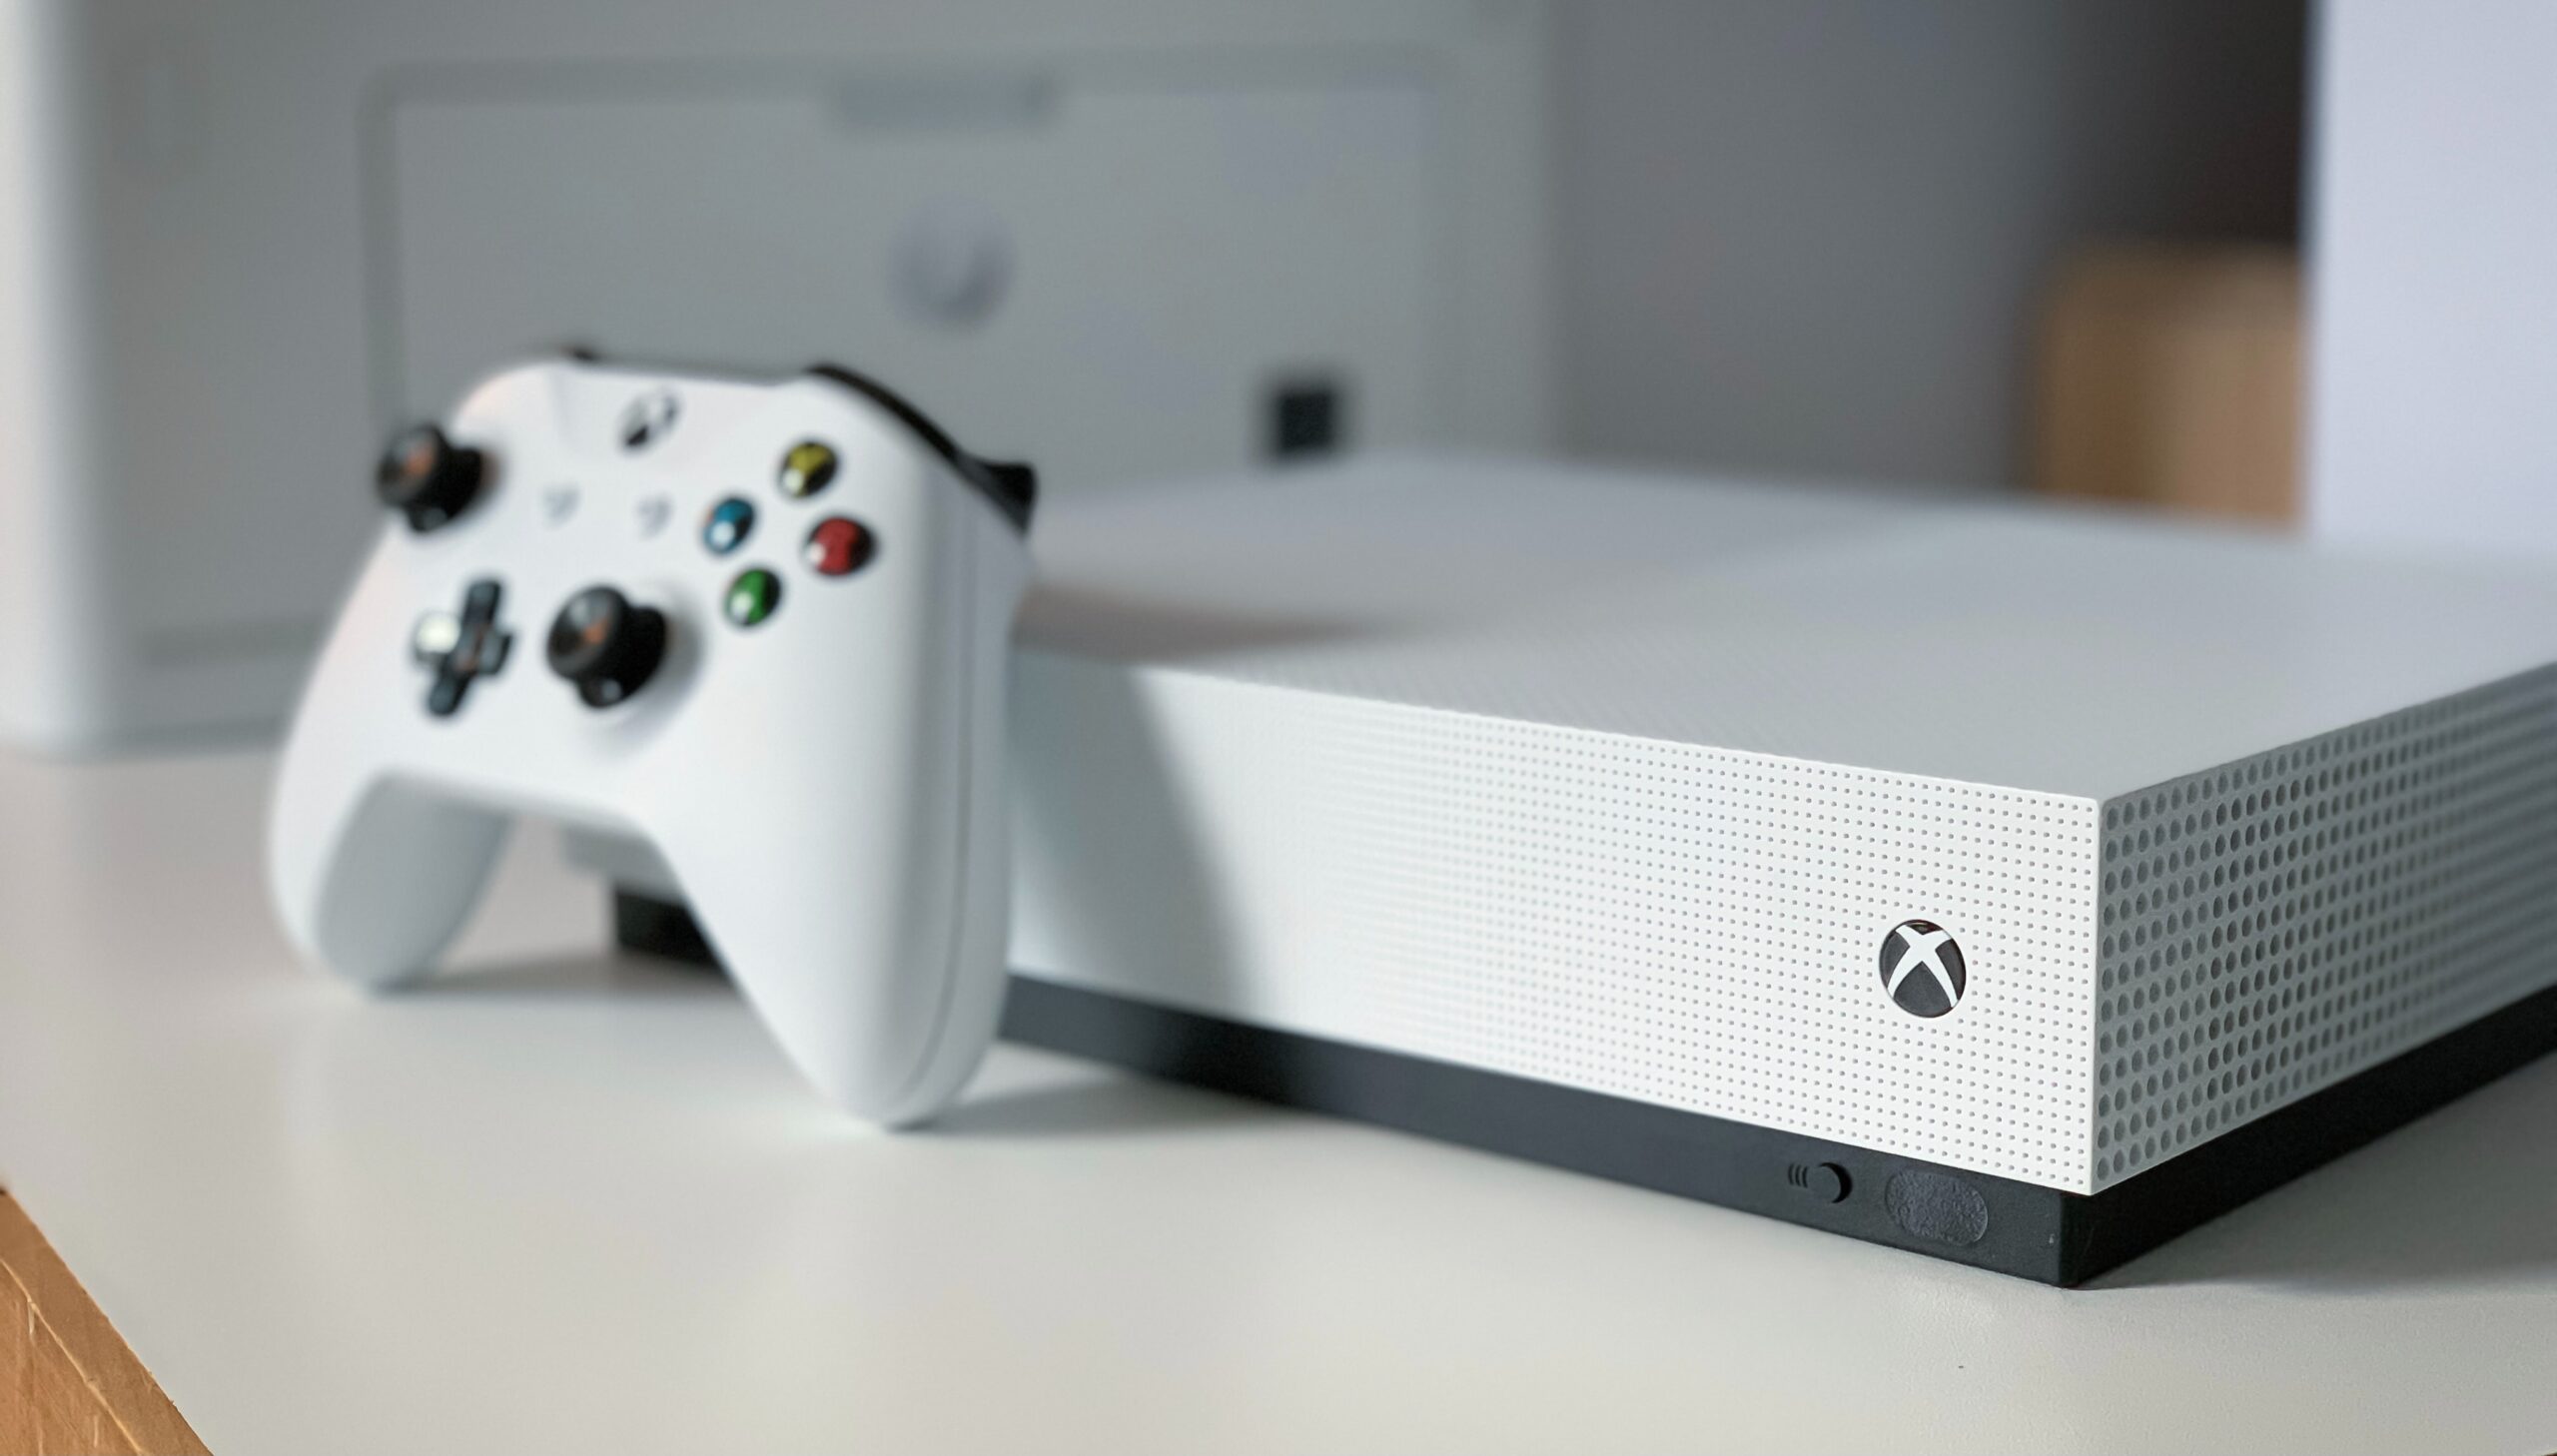 How Long Does An Xbox One Last?